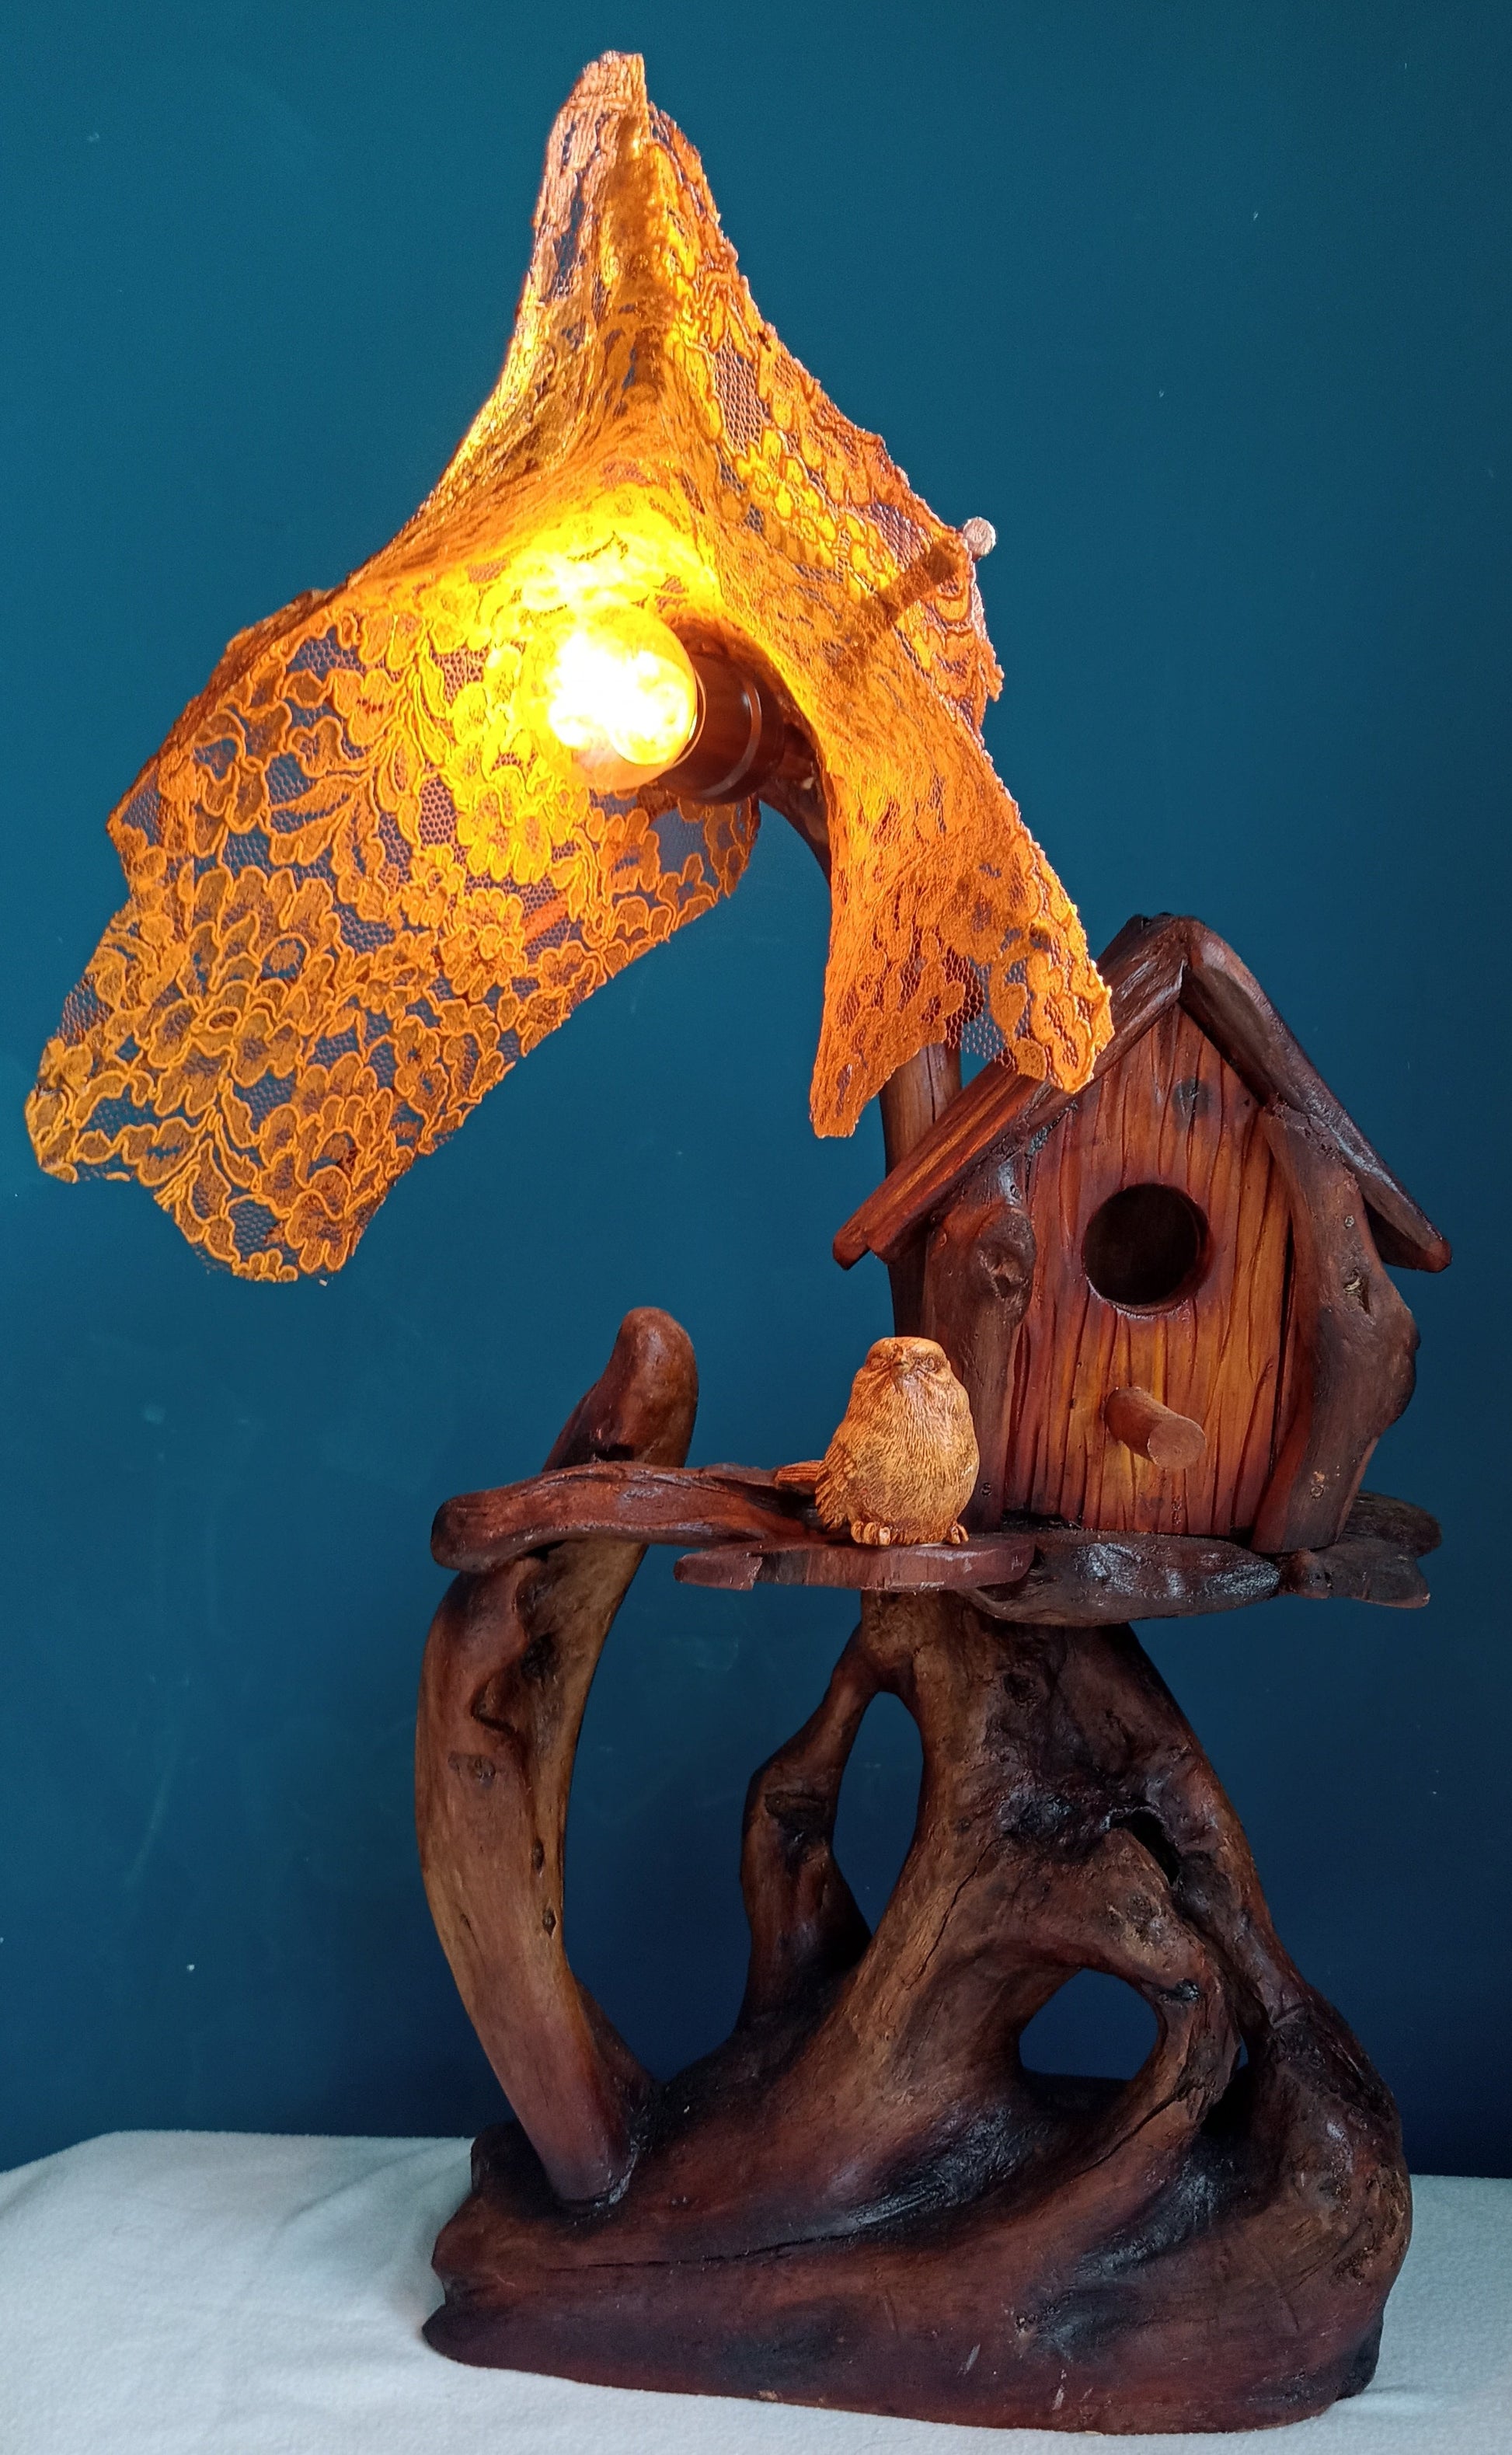 Driftwood lamp with Sparrow - Artistic - Blue Background 